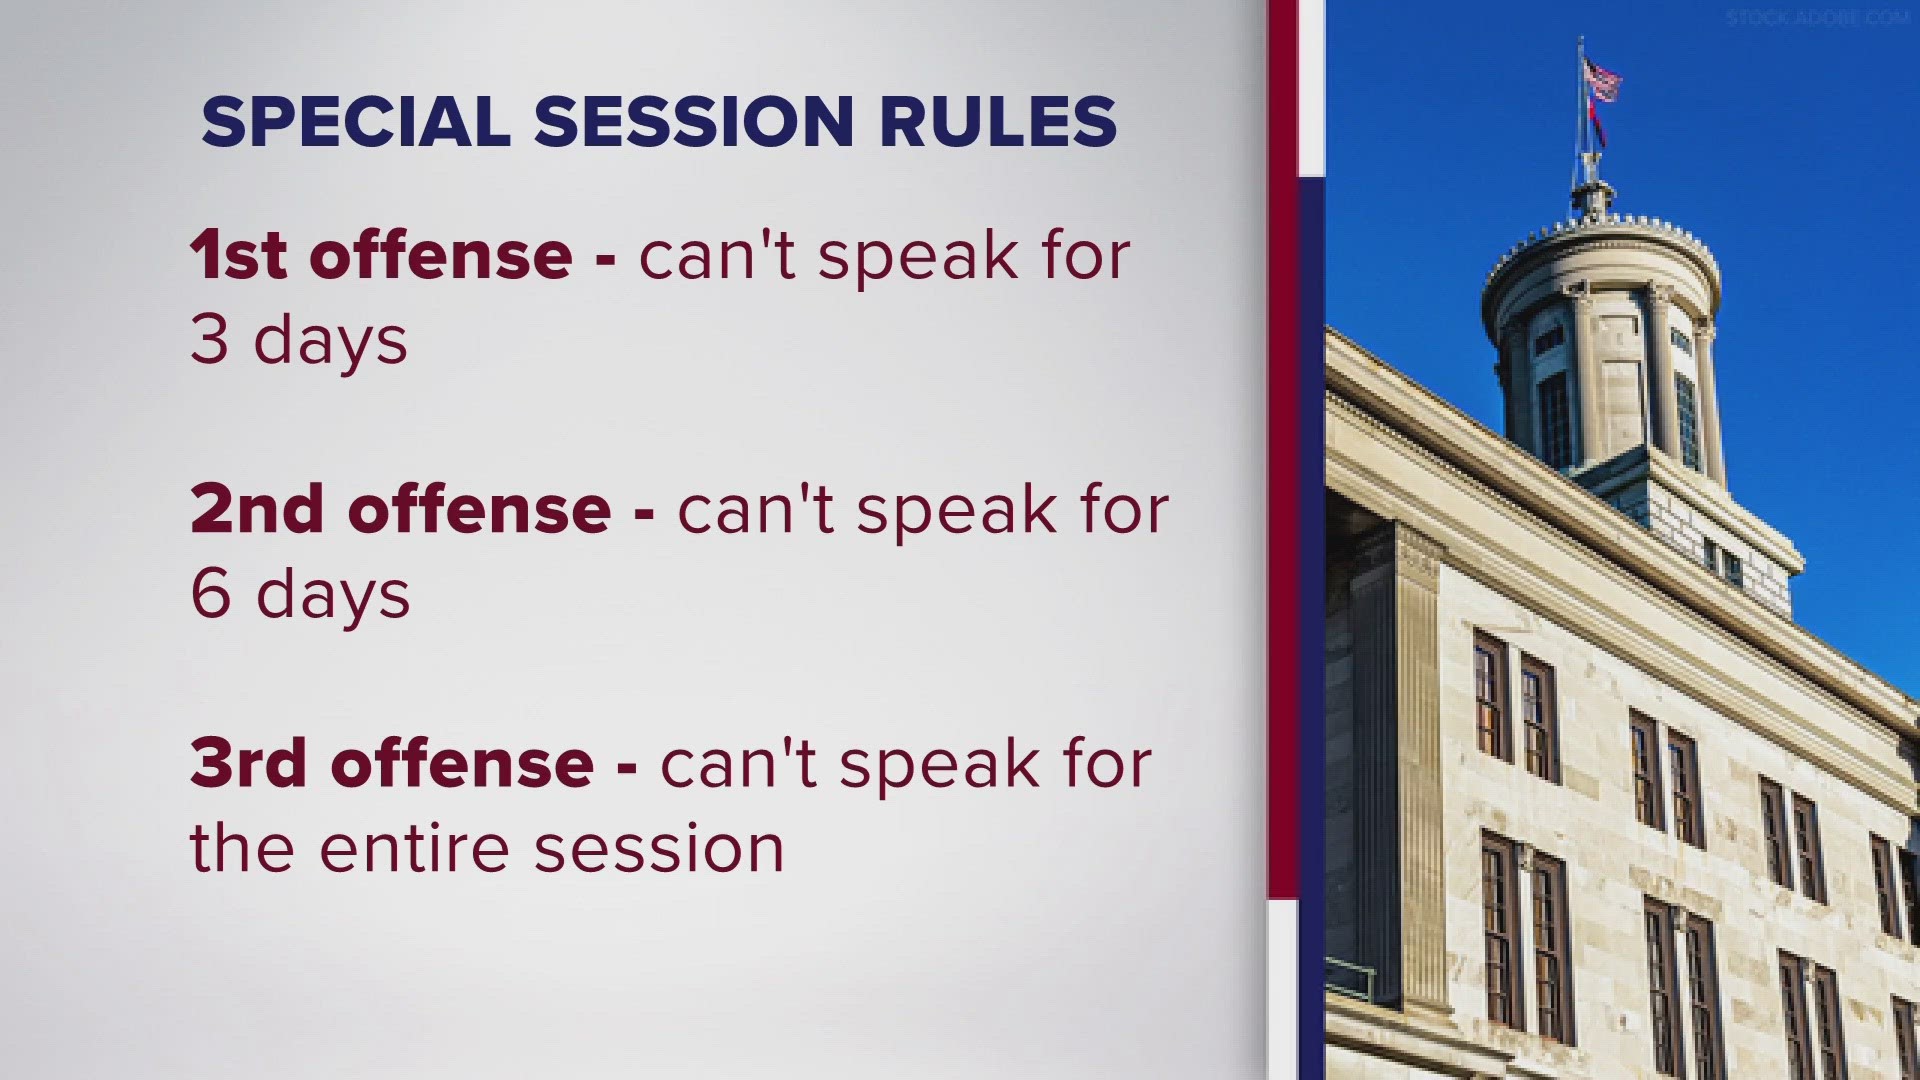 The first day of the state's special session focusing on public safety started on Monday. Lawmakers in the House first proposed rule changes.